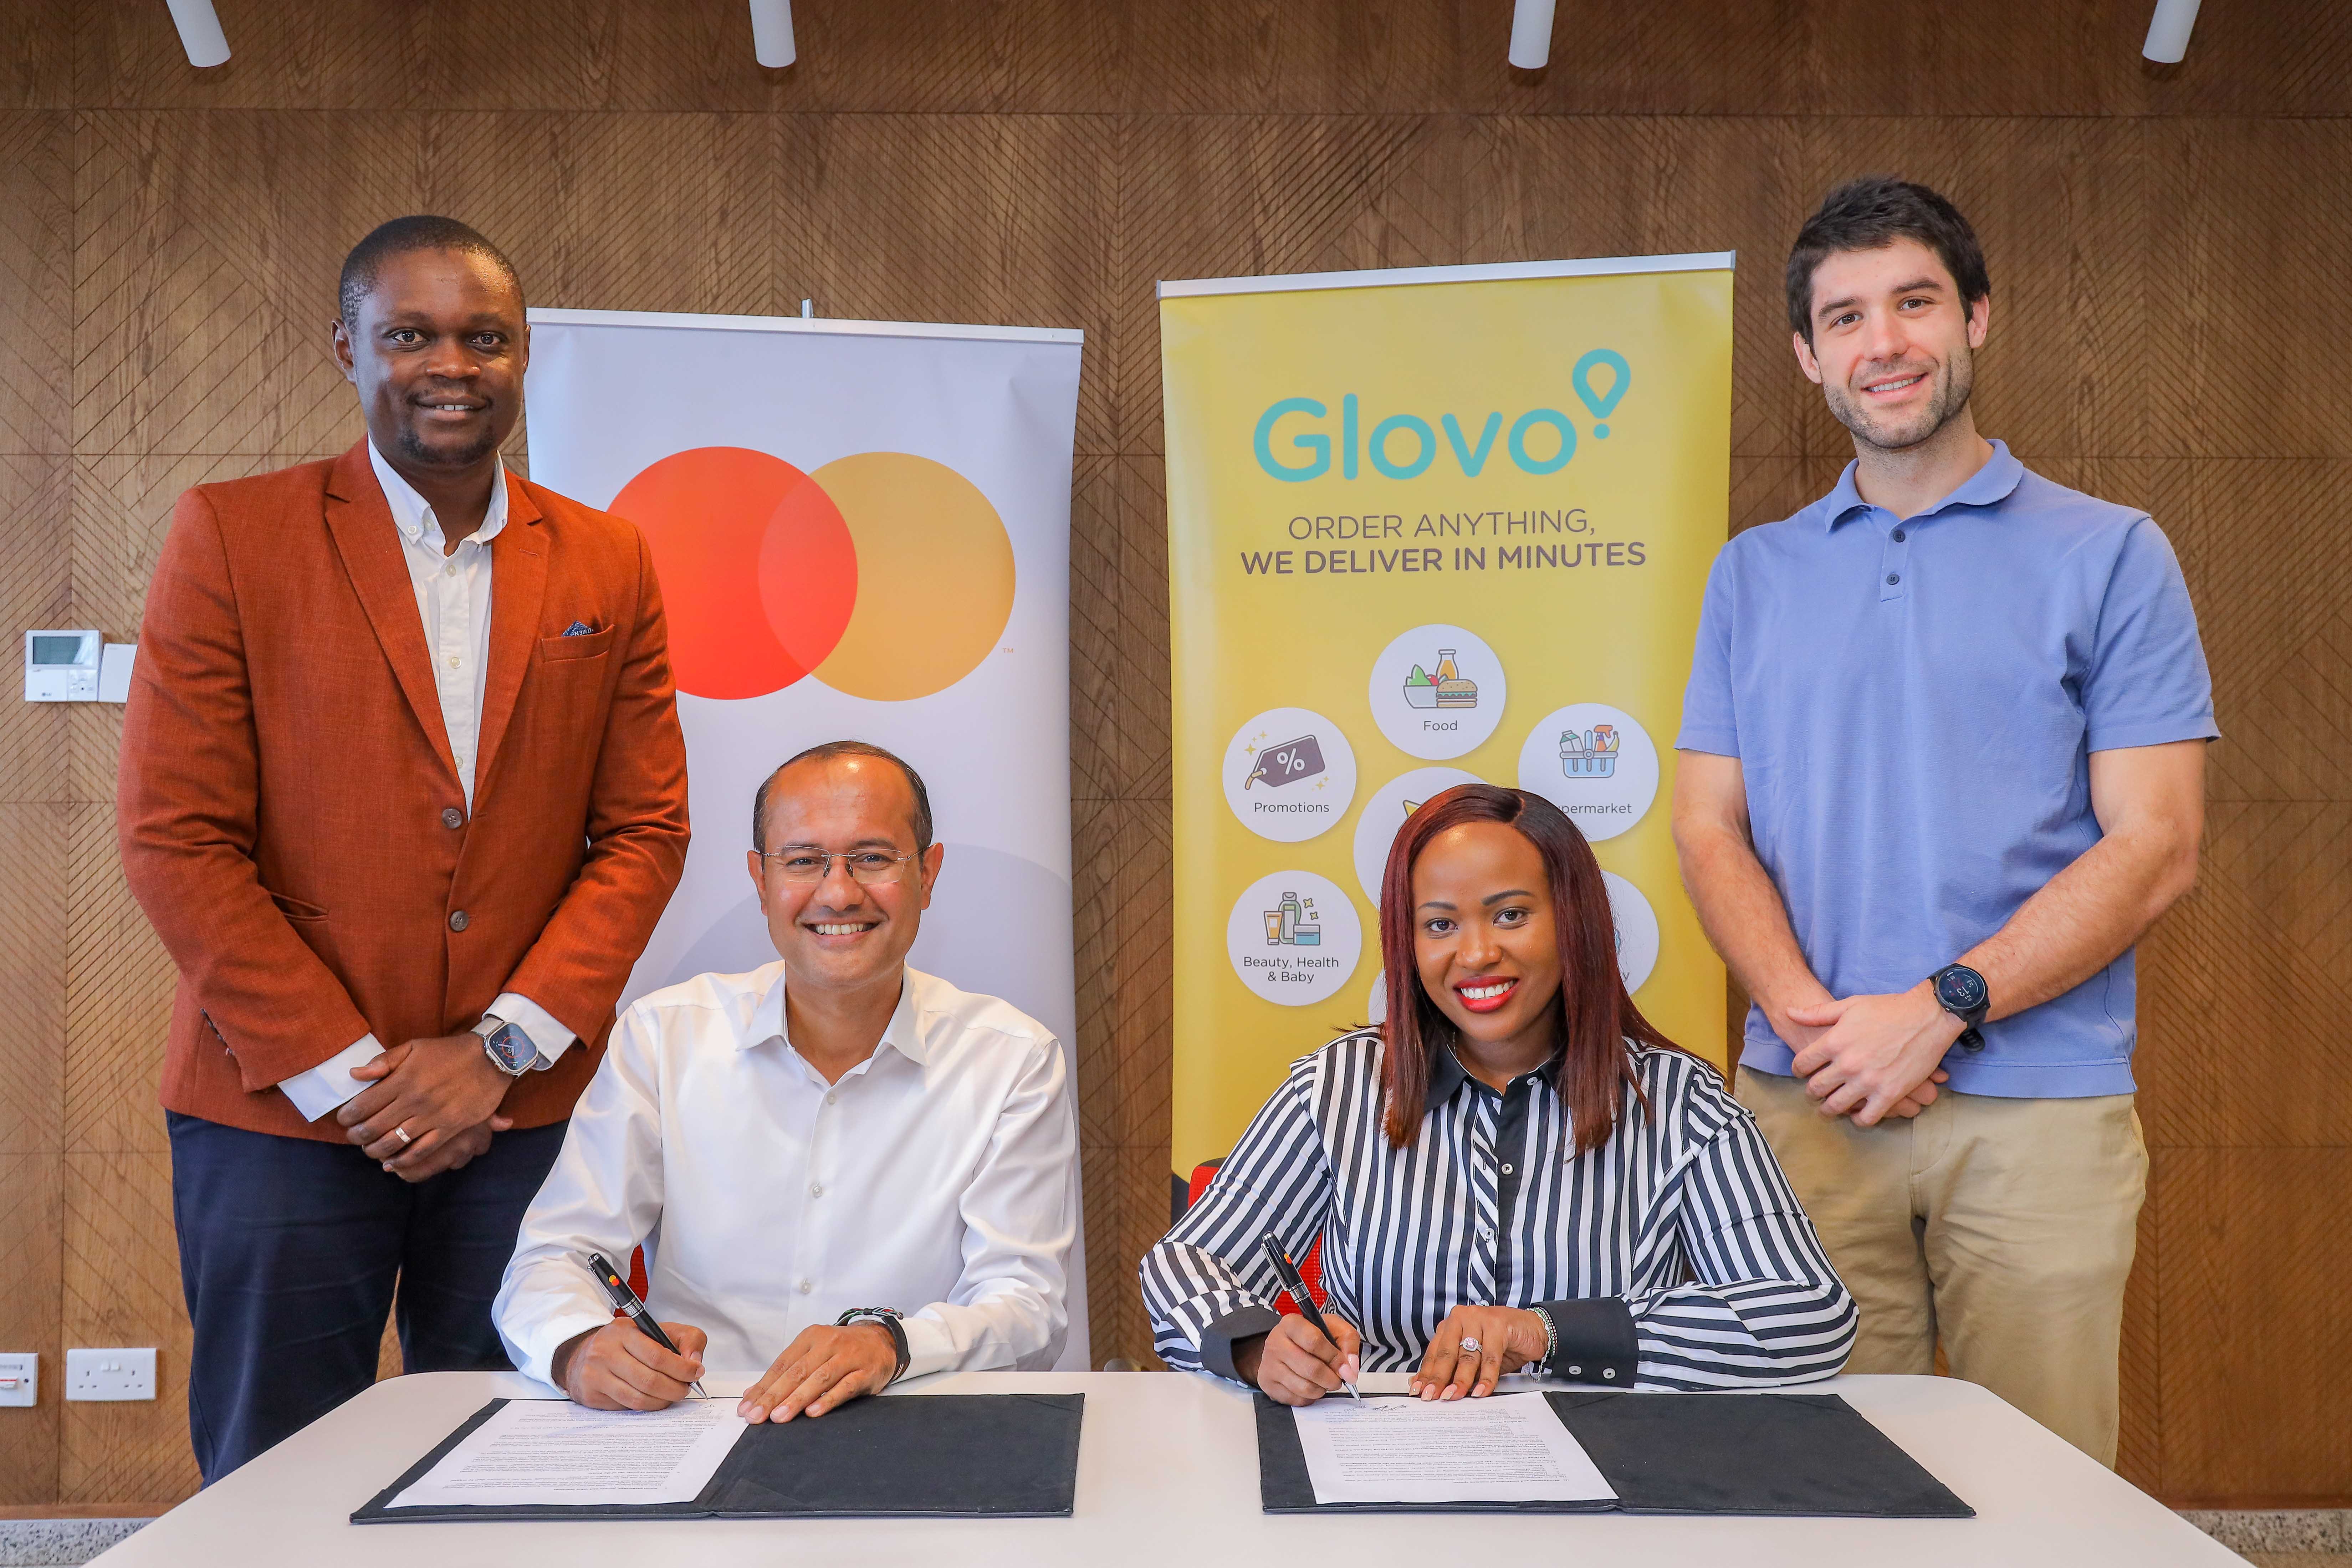 (L-R): Lenin Sembo Oyuga, Head of Telco Digital Partnerships in Middle East and Africa at Mastercard; Shehryar Ali, Senior Vice President and Country Manager for East Africa and Indian Ocean Islands at Mastercard; Caroline Mutuku, General Manager at Glovo Kenya; and Lorenzo Mayol, Partners and Brands Advertising Director at Glovo Africa commemorate their agreement to provide over 300,000 meals for school children in Kenya and Nigeria.